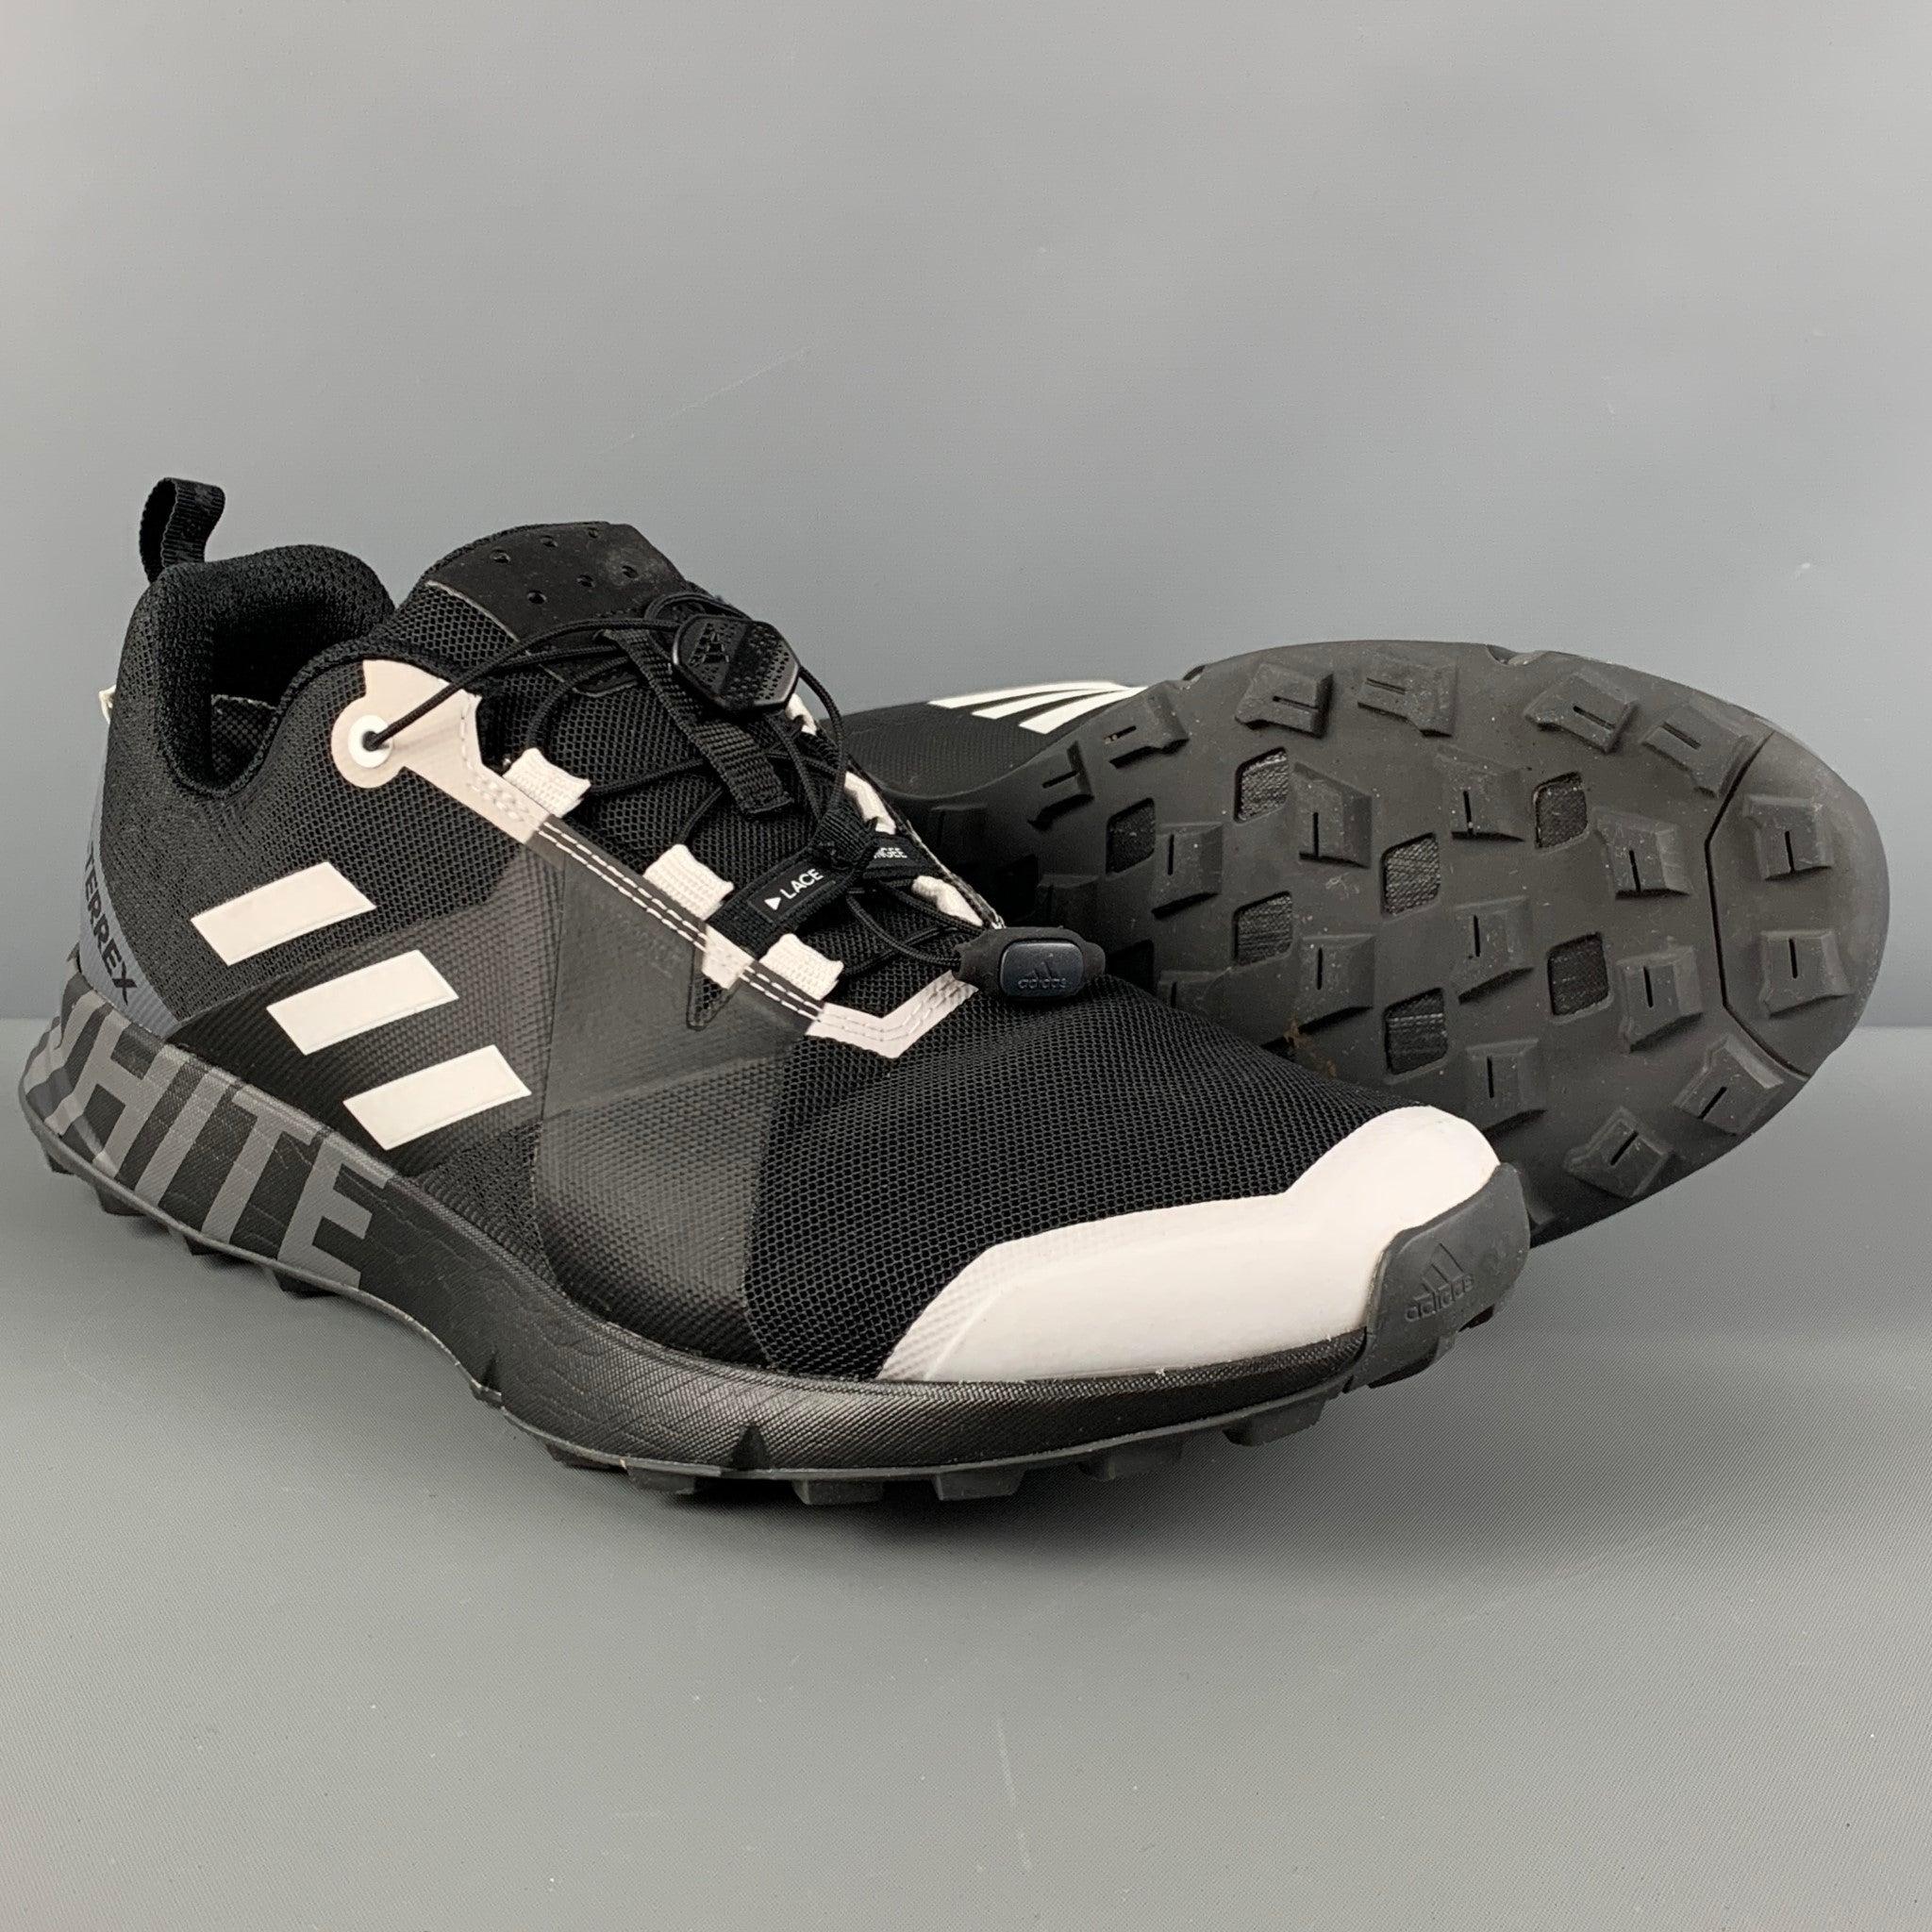 ADIDAS TERREX TWO GTX Size 10.5 Black White Nylon Lace Up Sneakers In Good Condition For Sale In San Francisco, CA